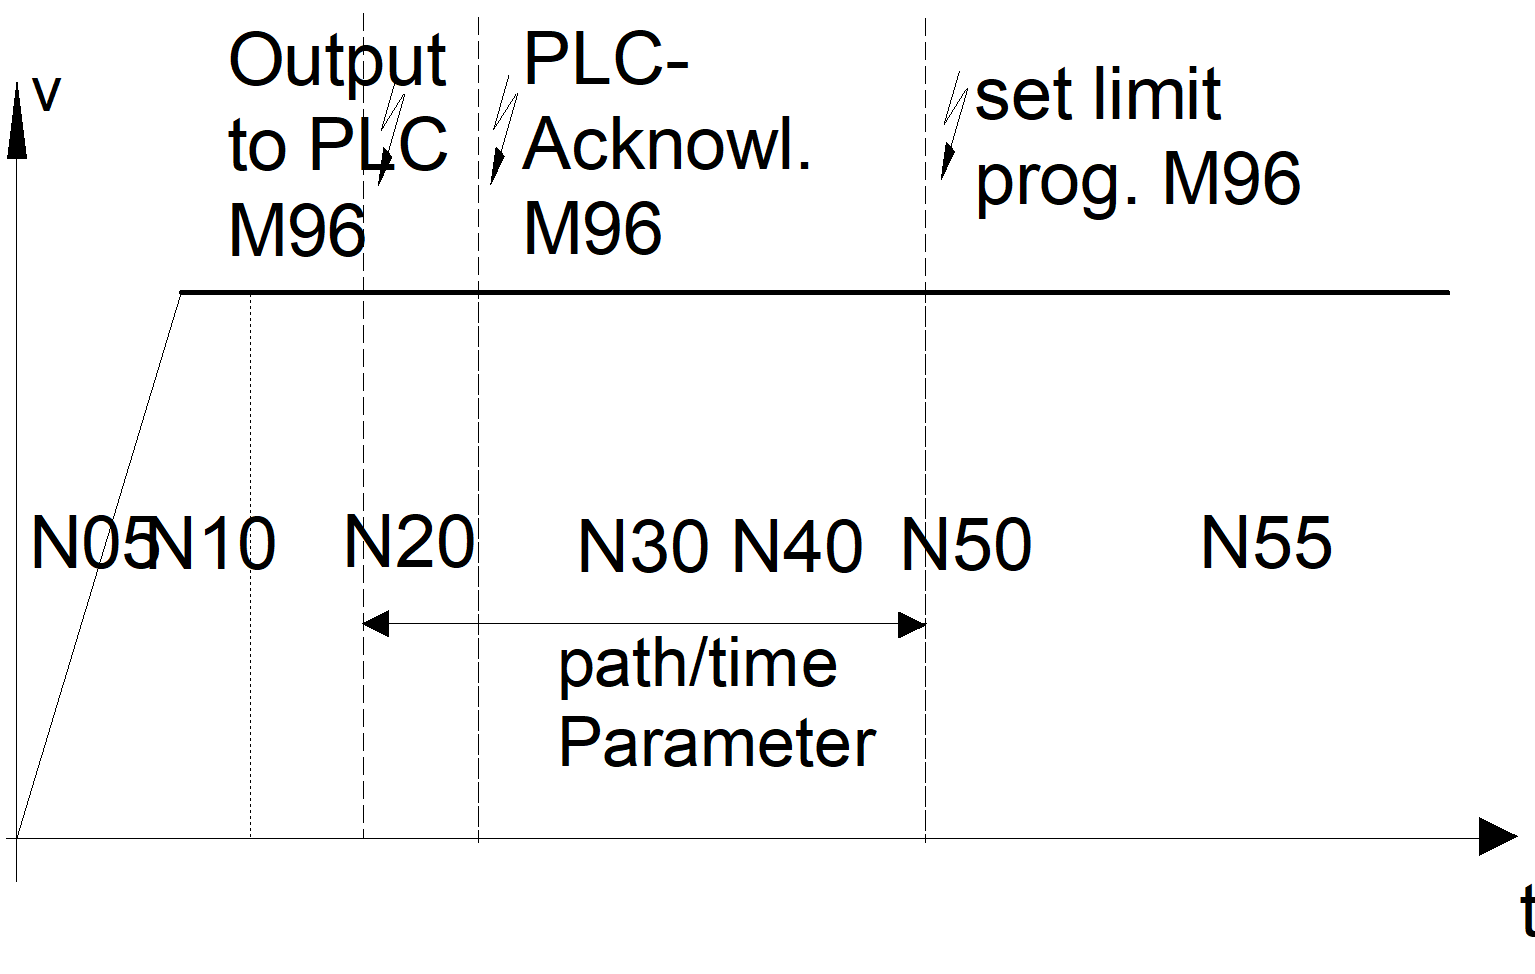 Synchronisation types MET_MOS and MEP_MOS